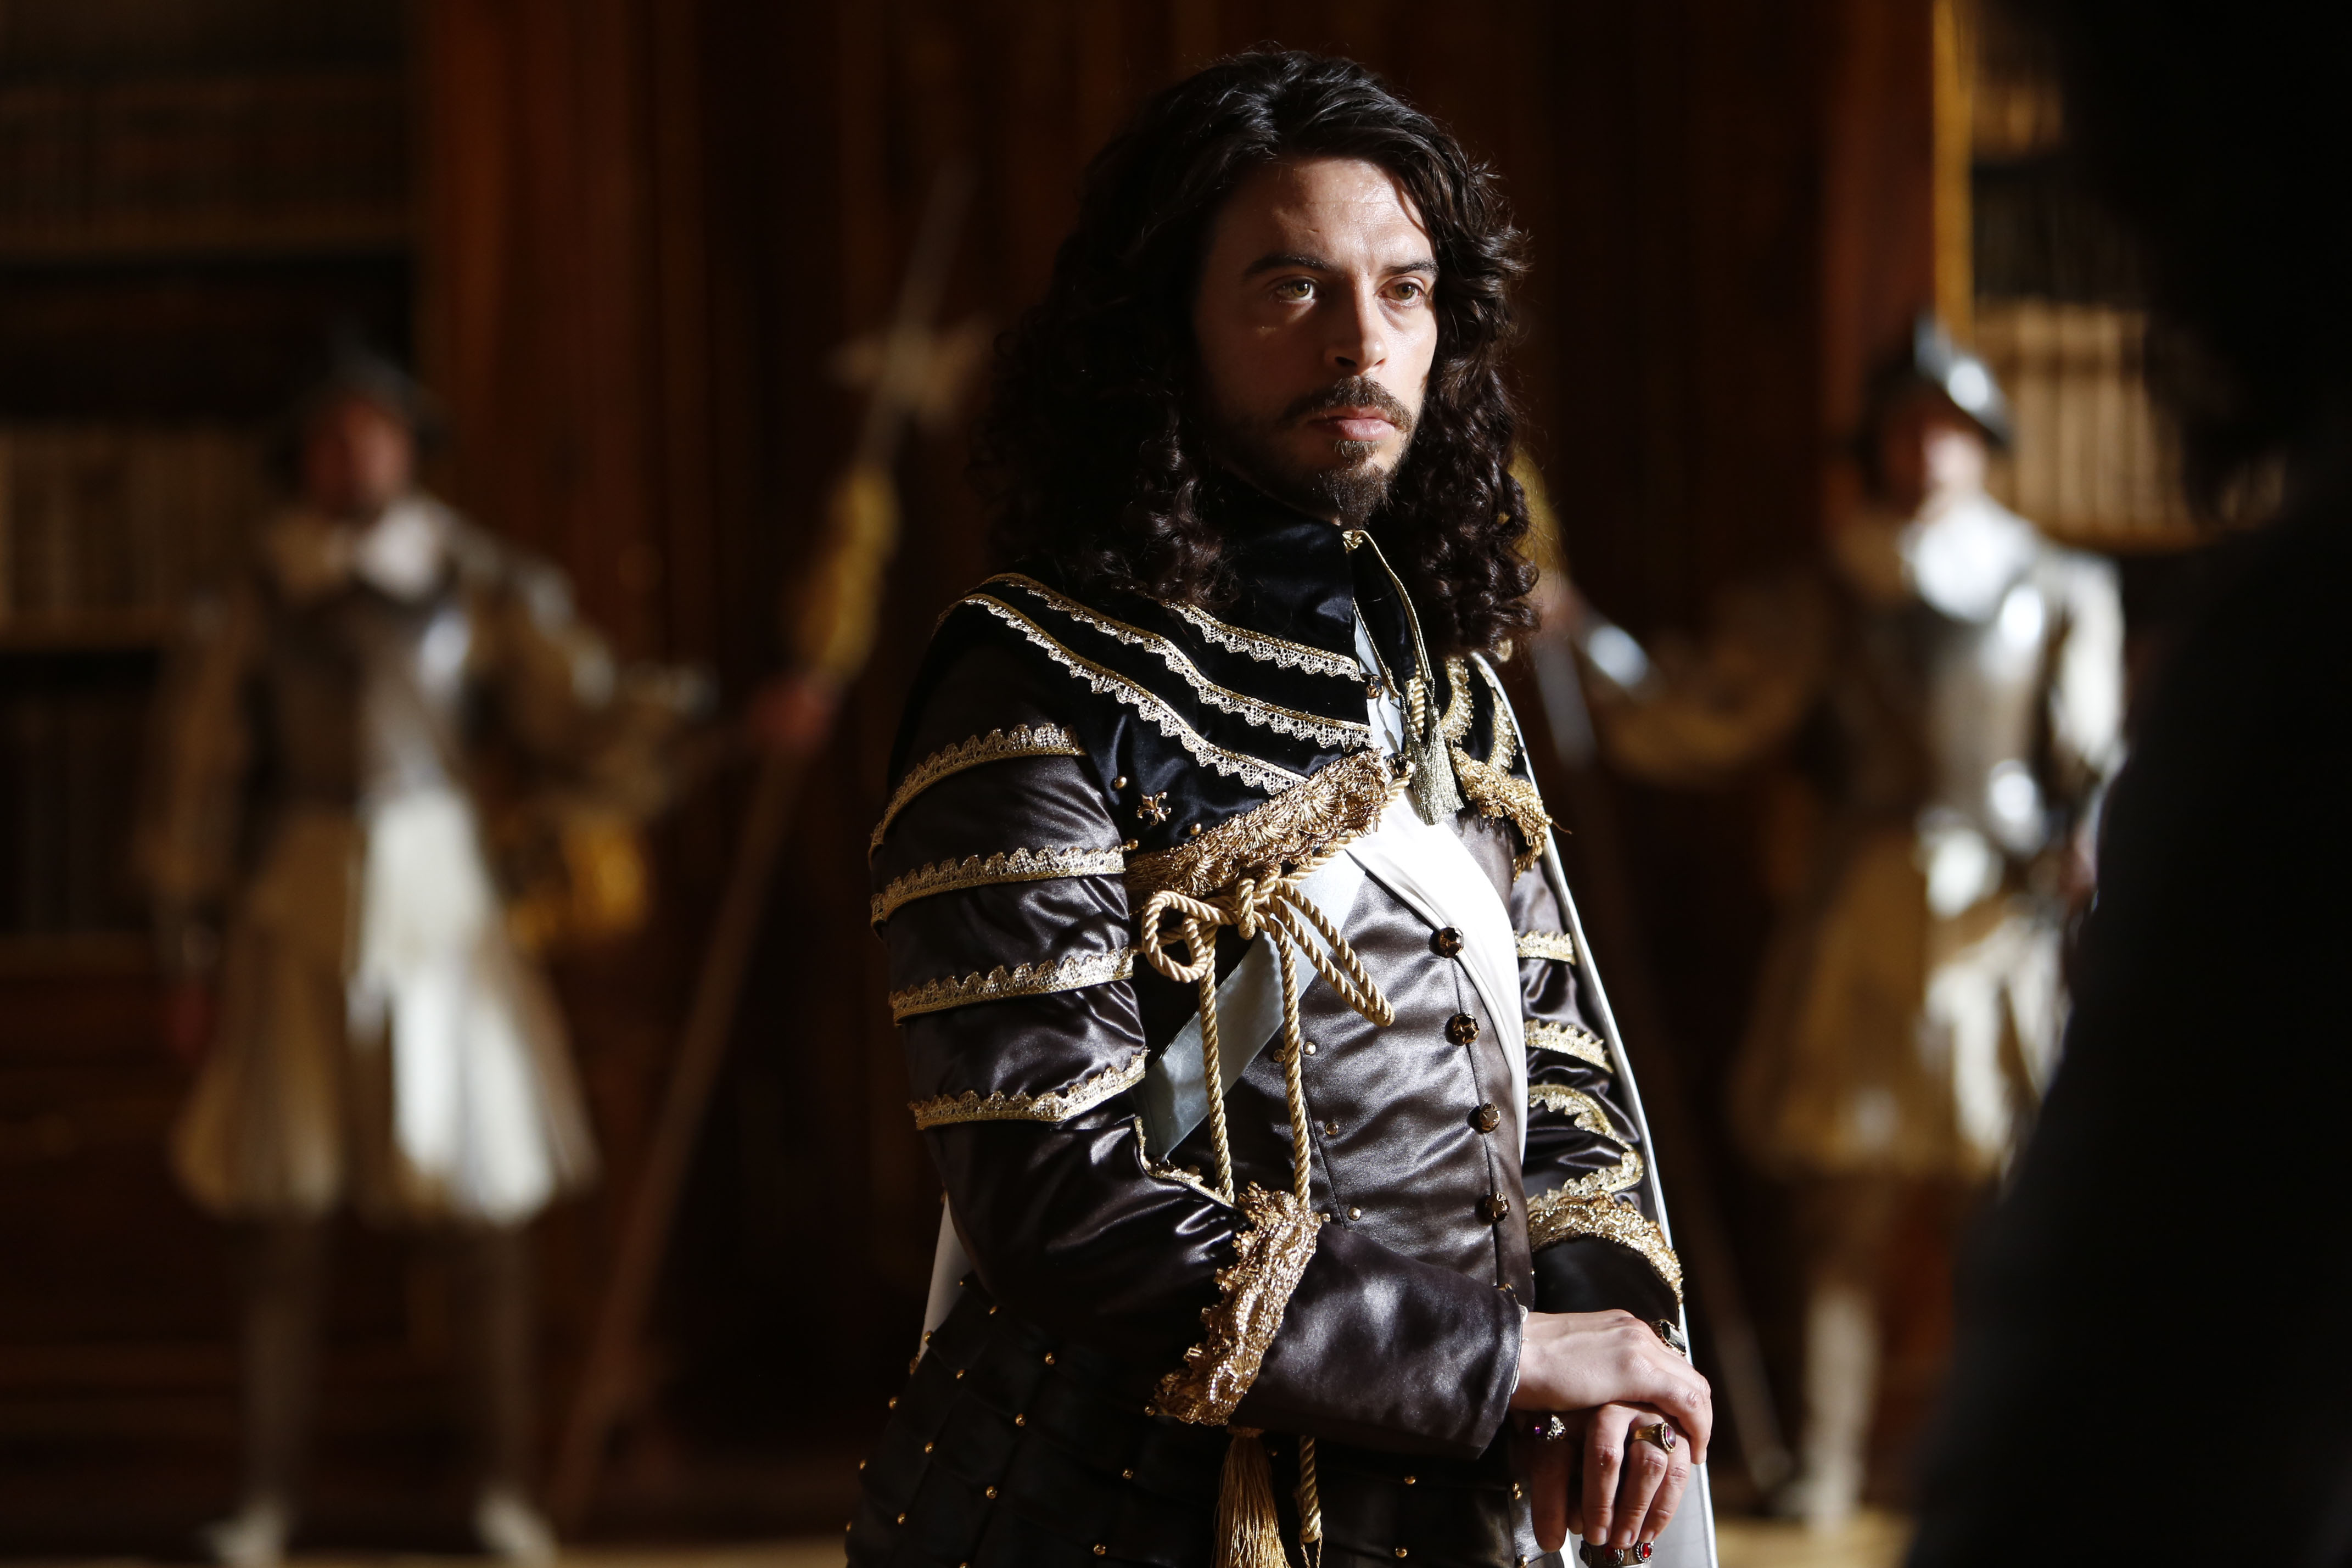 The Musketeers - King Louis (With images)